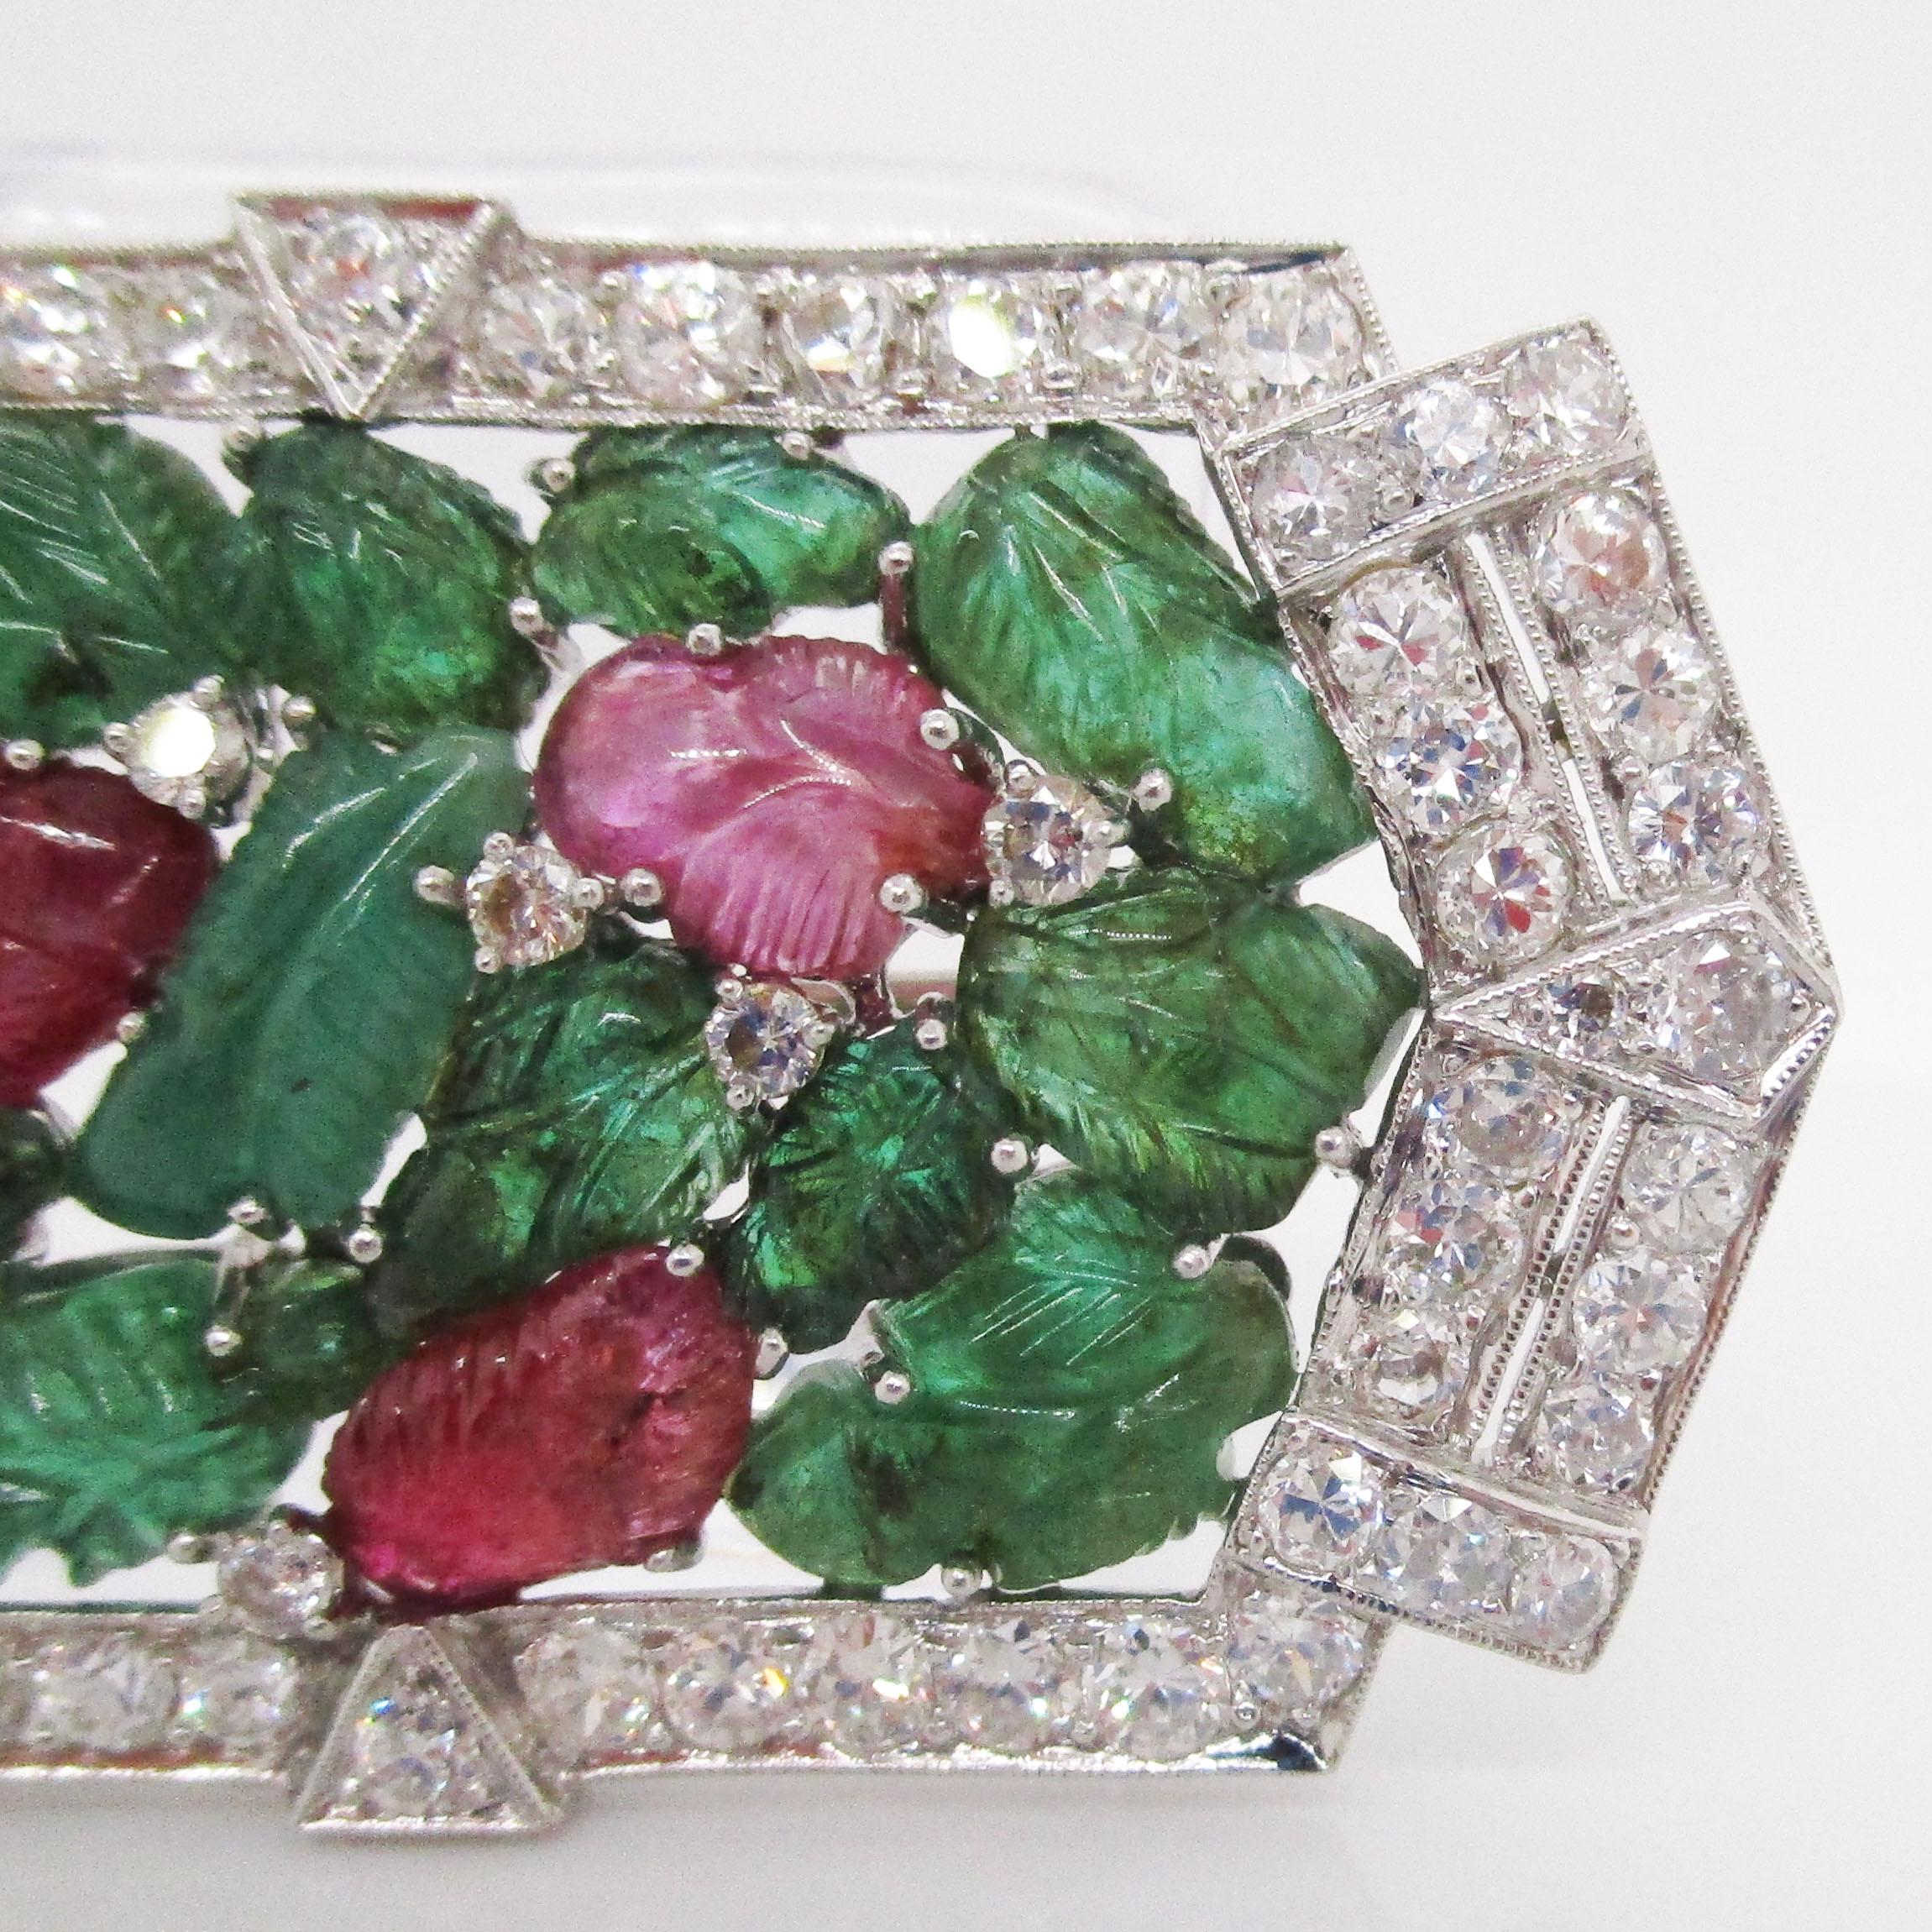 This absolutely breathtaking platinum brooch is a tour de force Art Deco piece, dating back to 1925 and featuring an enthralling combination of carved emeralds and rubies within a diamond frame in the envied Tutti Frutti style! The emeralds and